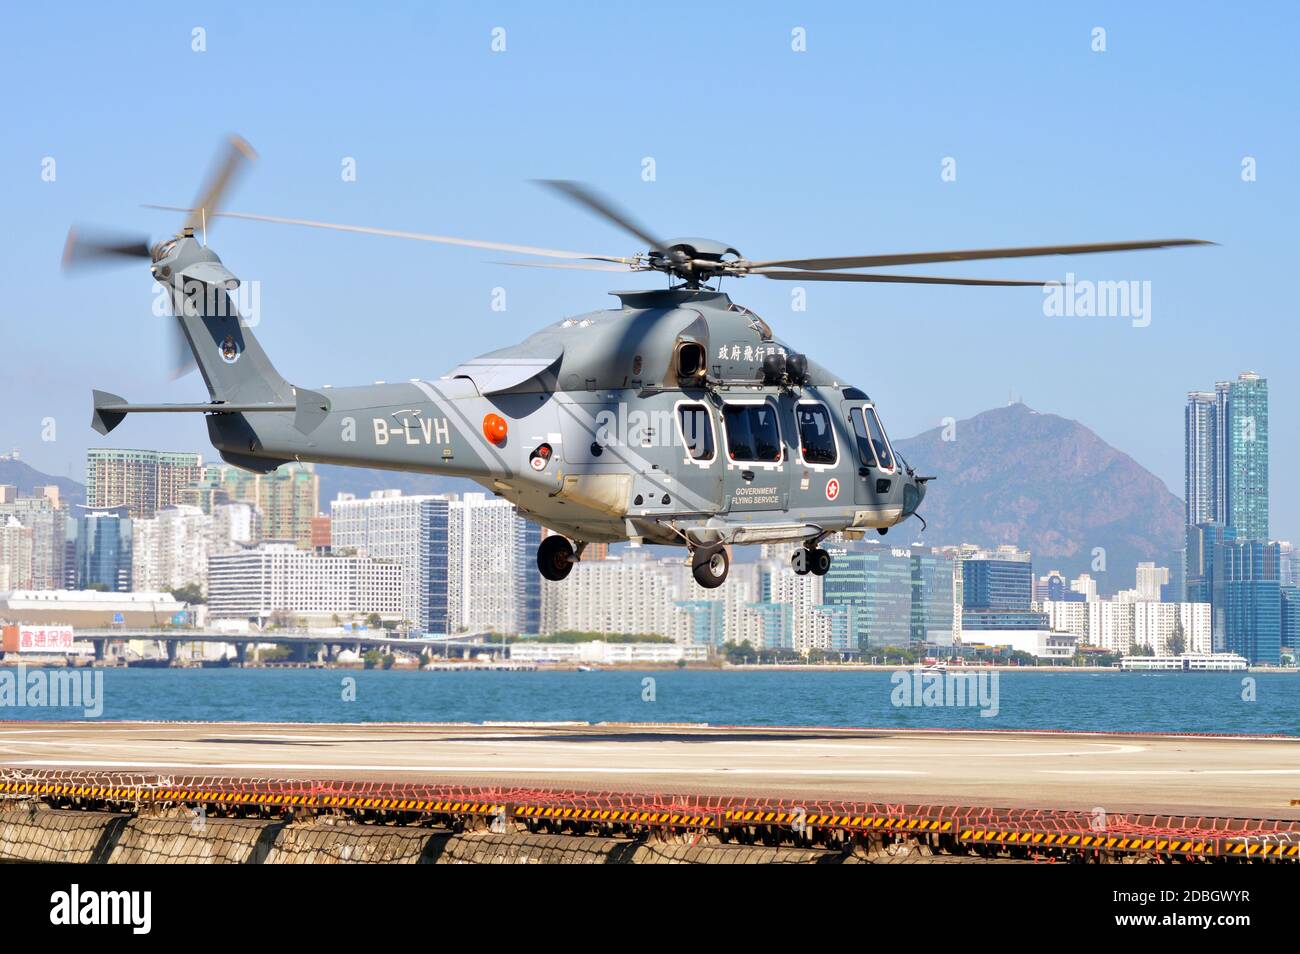 An Airbus Helicopters 'Cheetah' H175 helicopter operated by the Government Flying Service (政府飛行服務隊) lifts off at Wanchai Heliport, Hong Kong Stock Photo